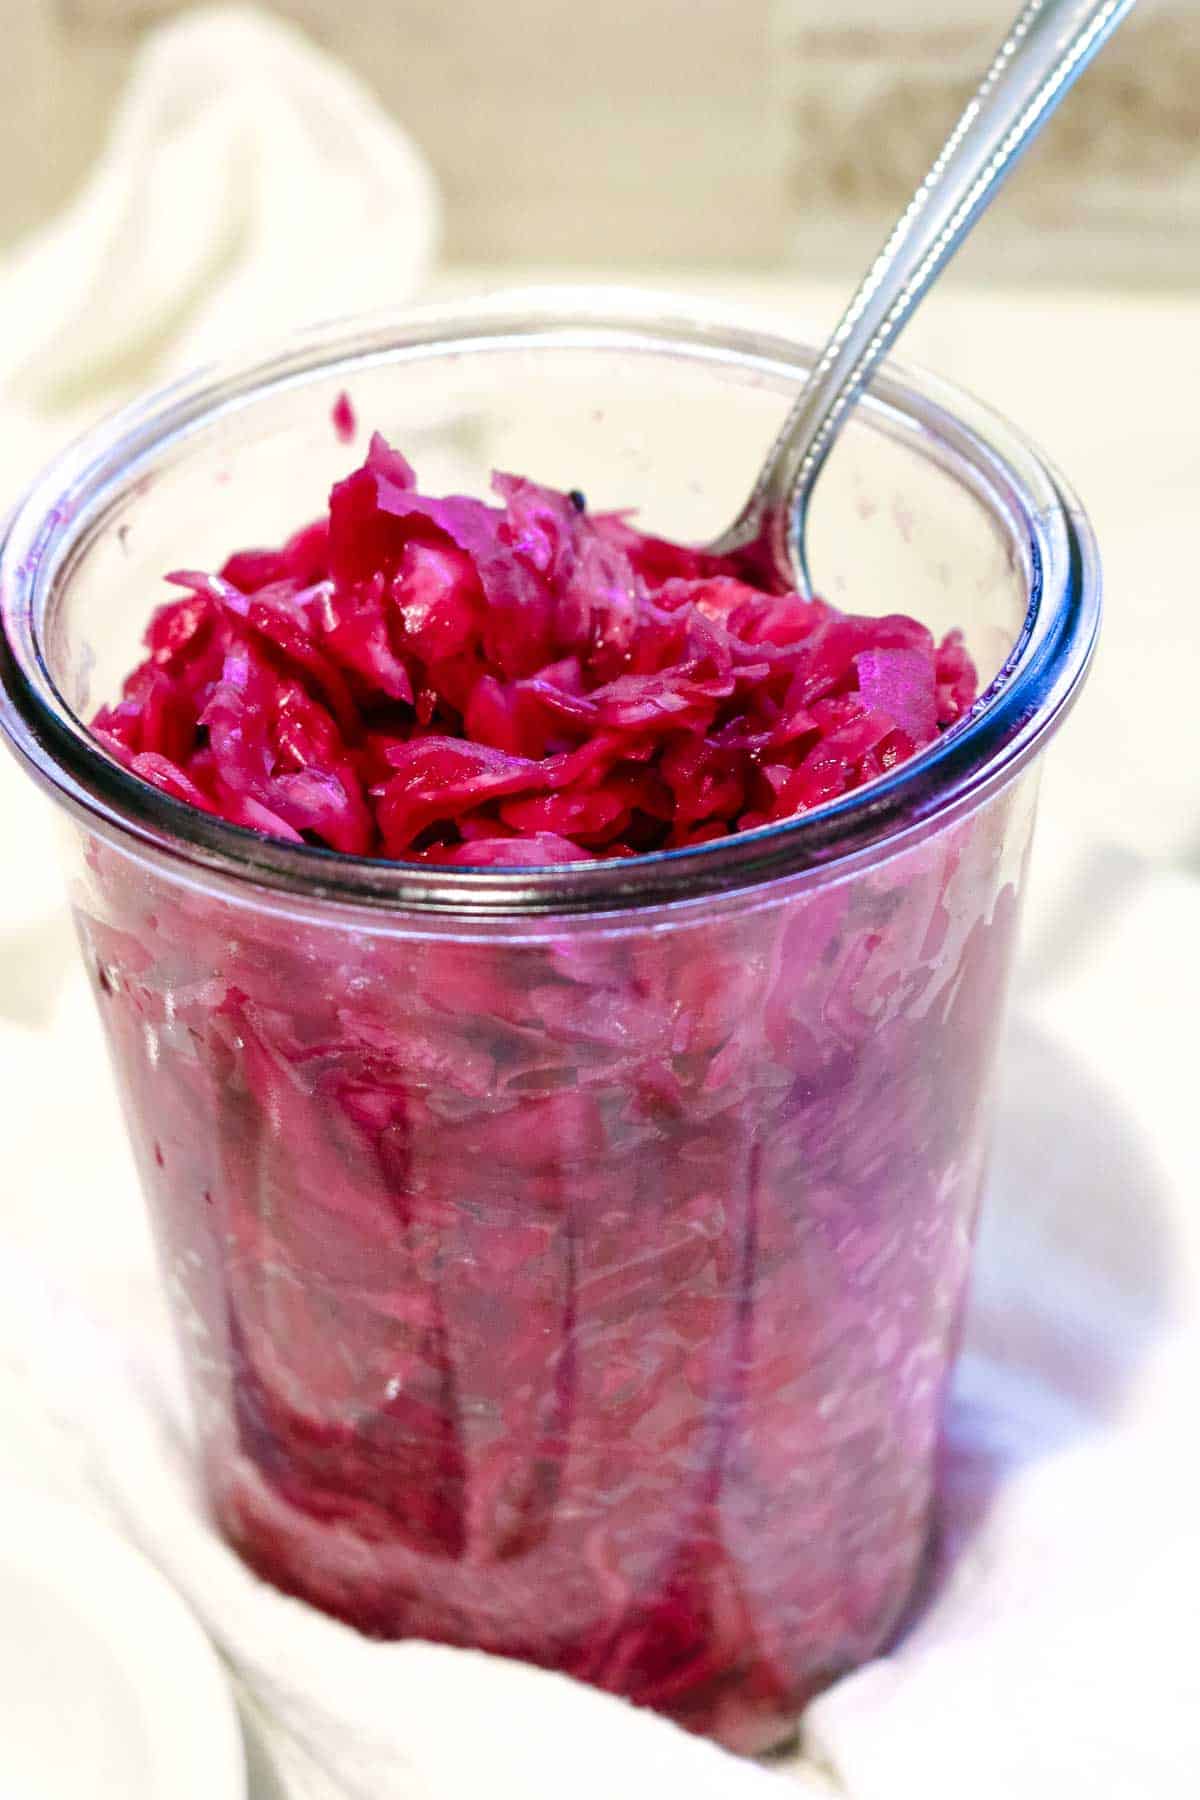 red cabbage fermented in a glass jar with a spoon.